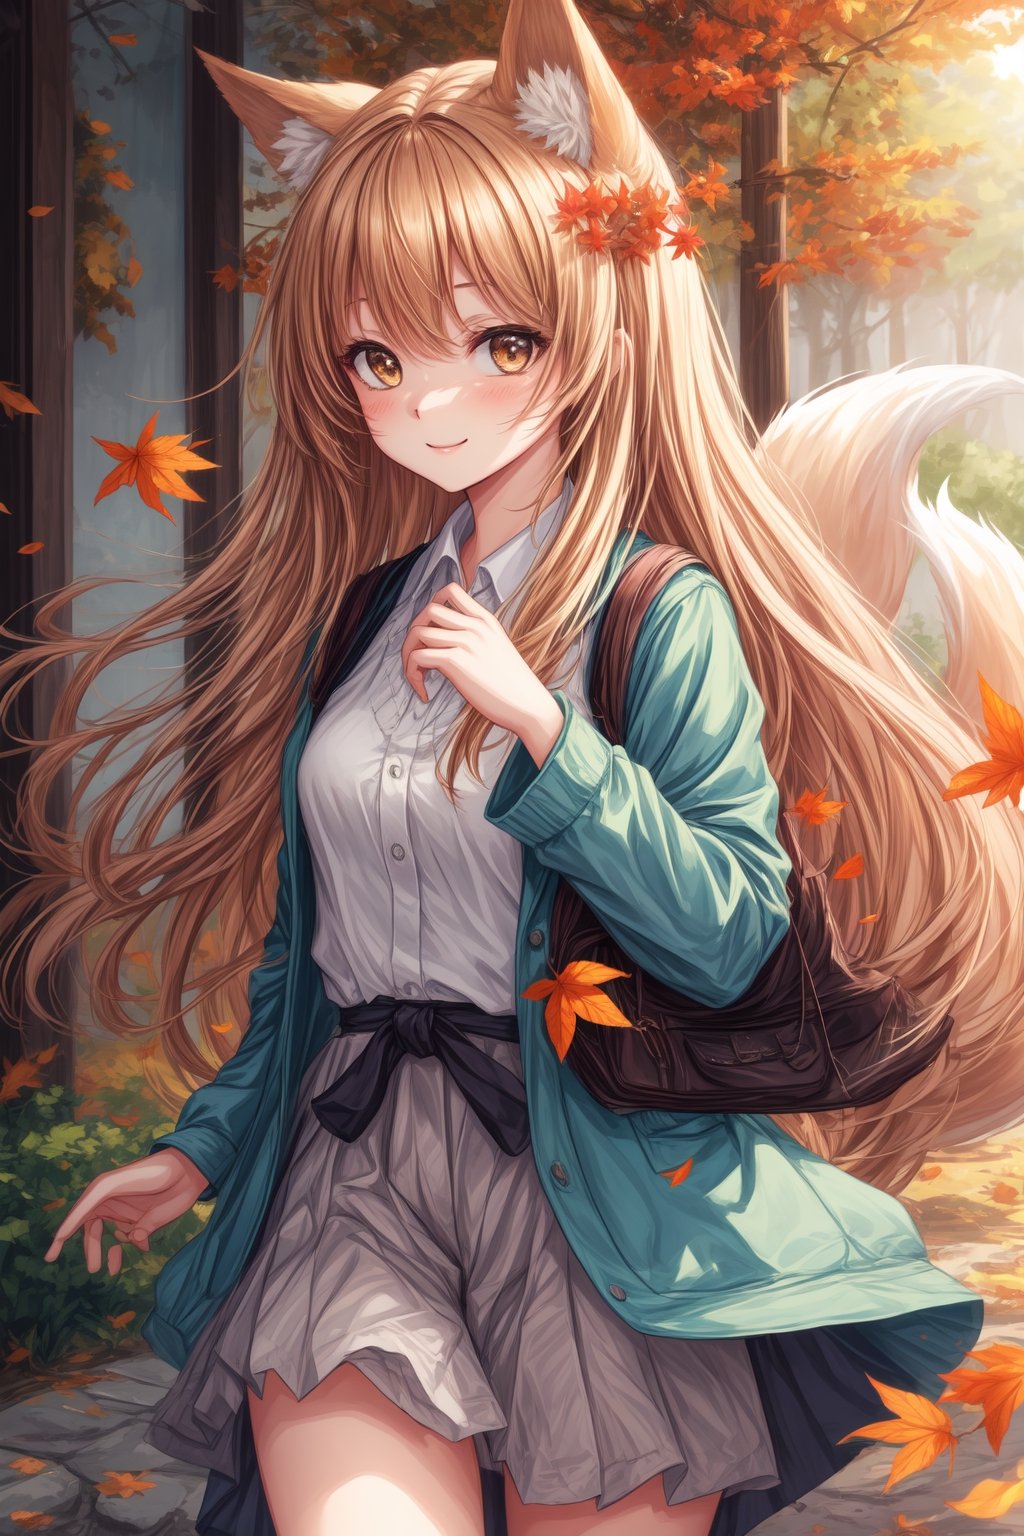 An anime-style depiction of a girl with fox ears playfully throwing a handful of autumn leaves into the air and smiling happily as the leaves float around her.